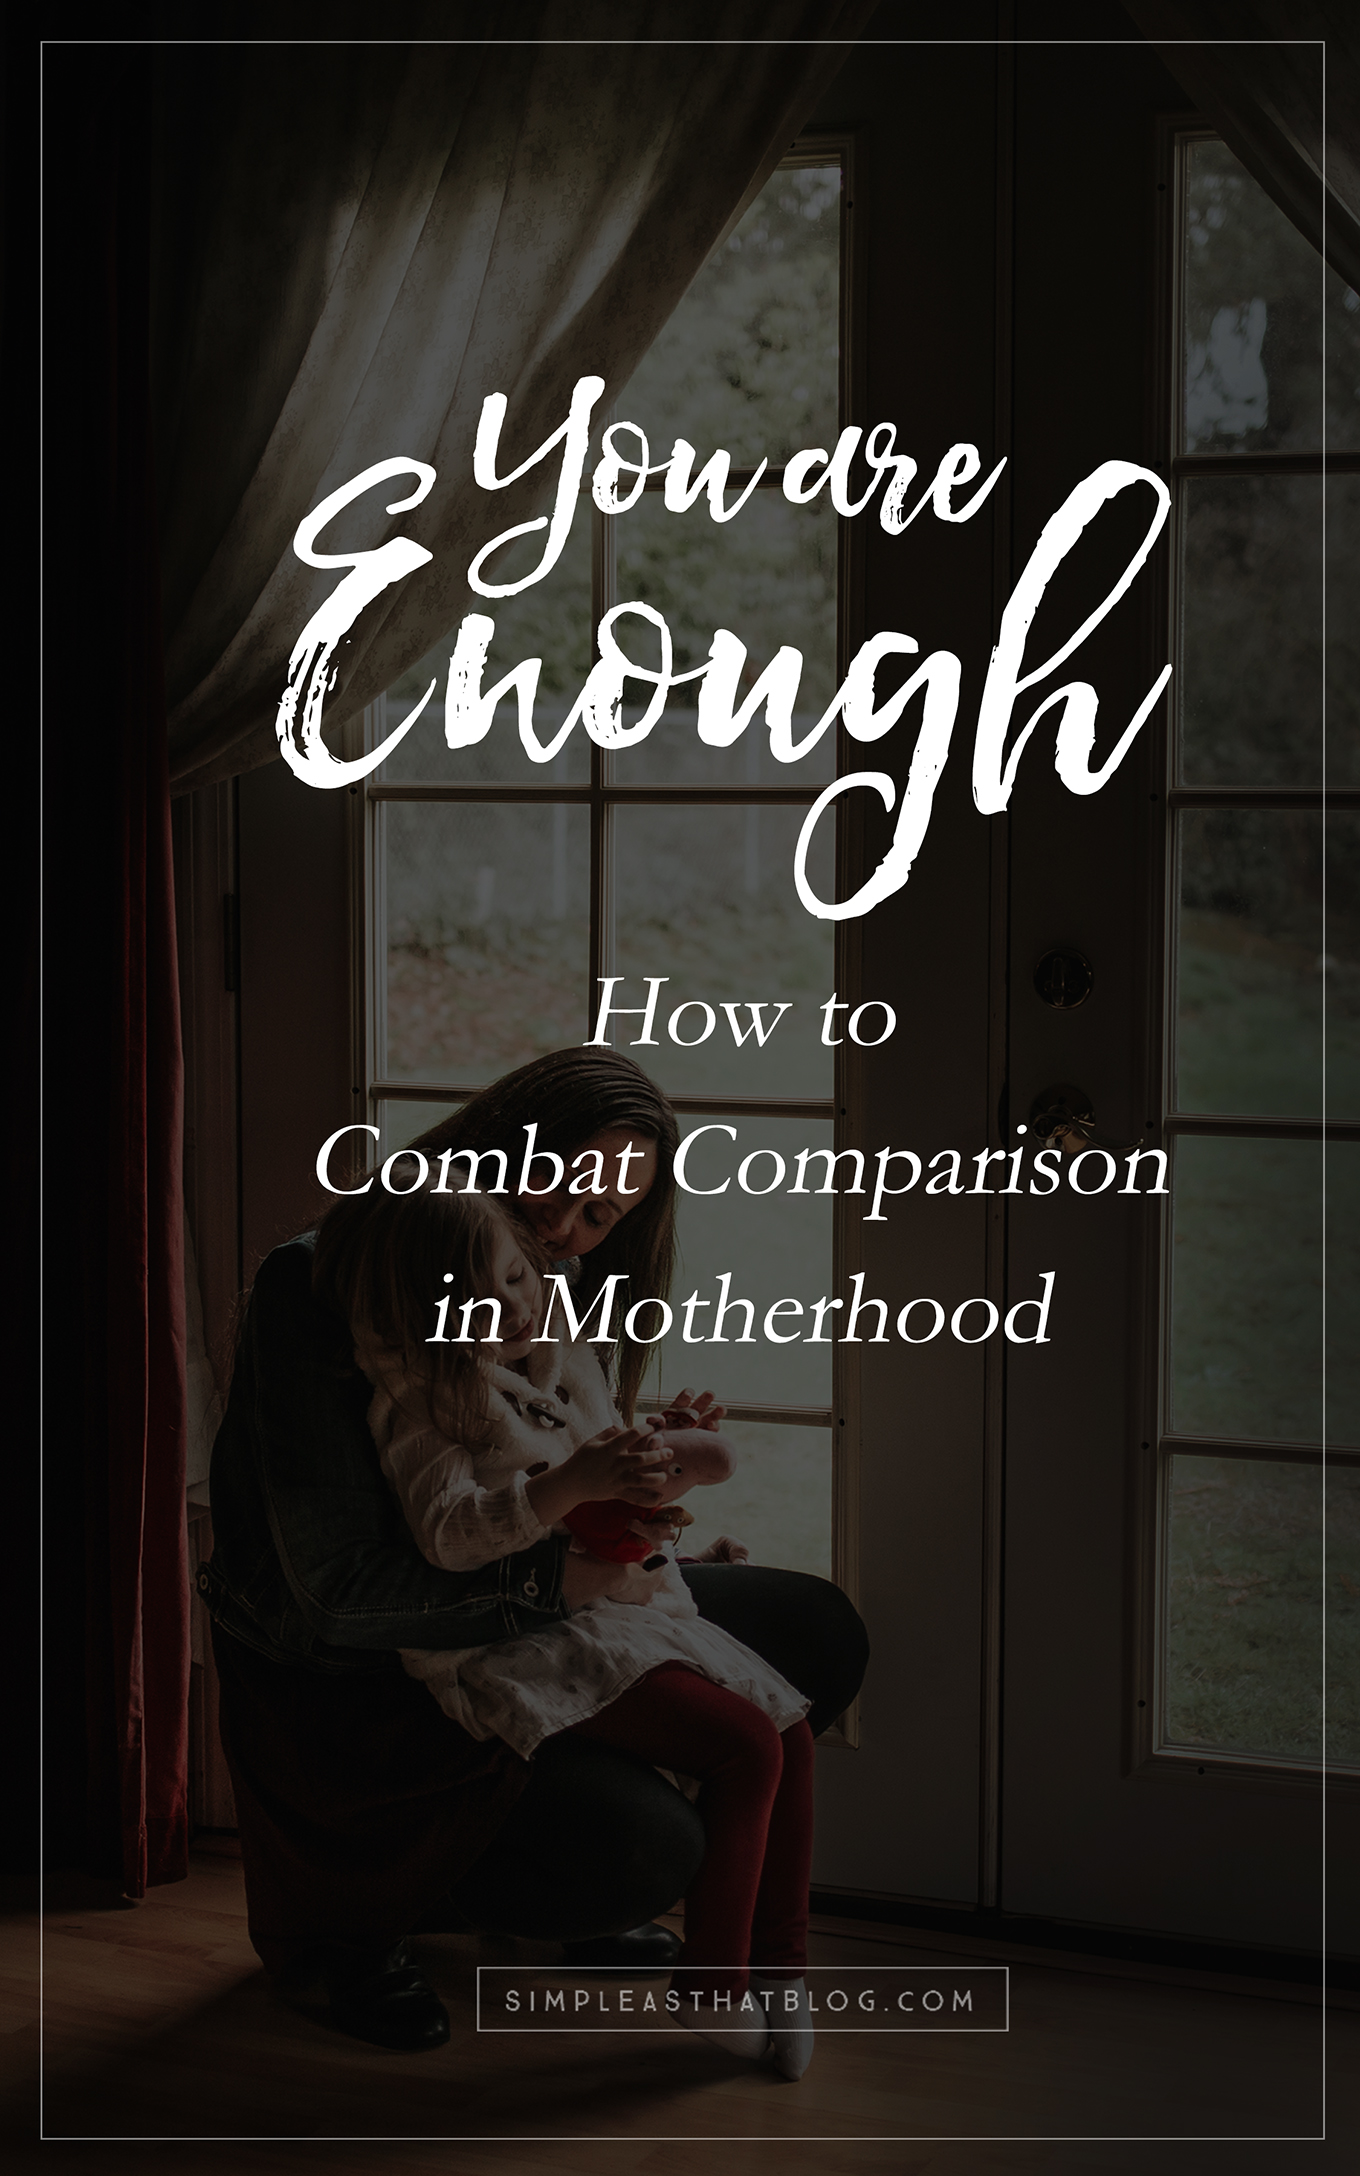 If we focus on all that our life isn't, we miss all the beauty that our life IS. 4 powerful ways to combat comparison in motherhood.